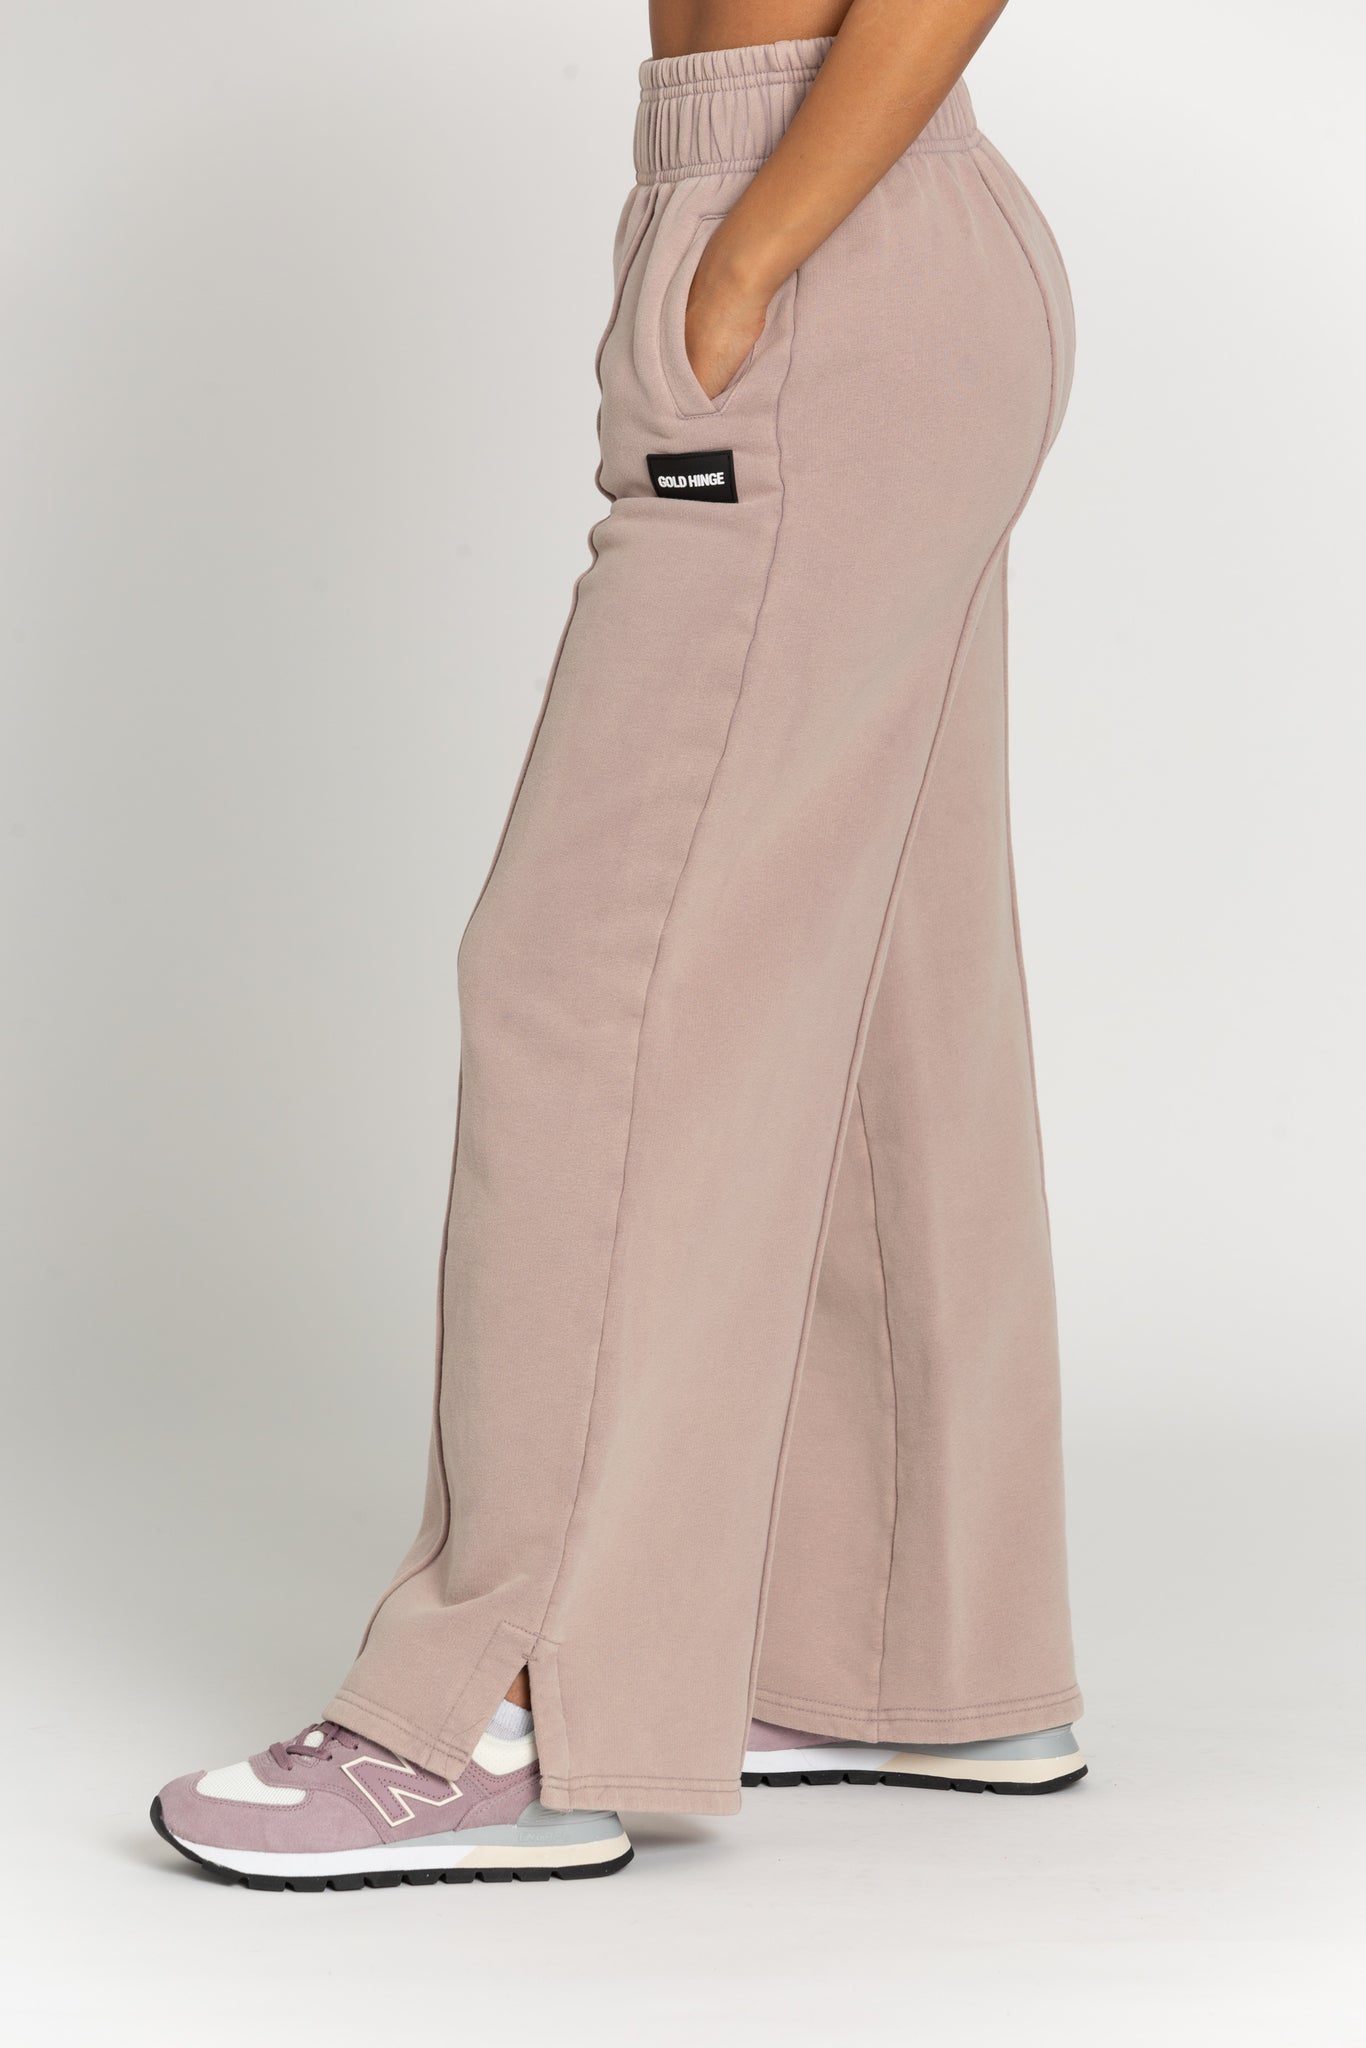 Stylish and practical, these wide-leg sweats are the perfect choice for casual days and light activities. With a wide, high-waisted waistband, exposed seams, and an acid-wash finish, you'll have a chic and unique look. For an on-trend lounge look, pair it with the matching sweatshirt. 